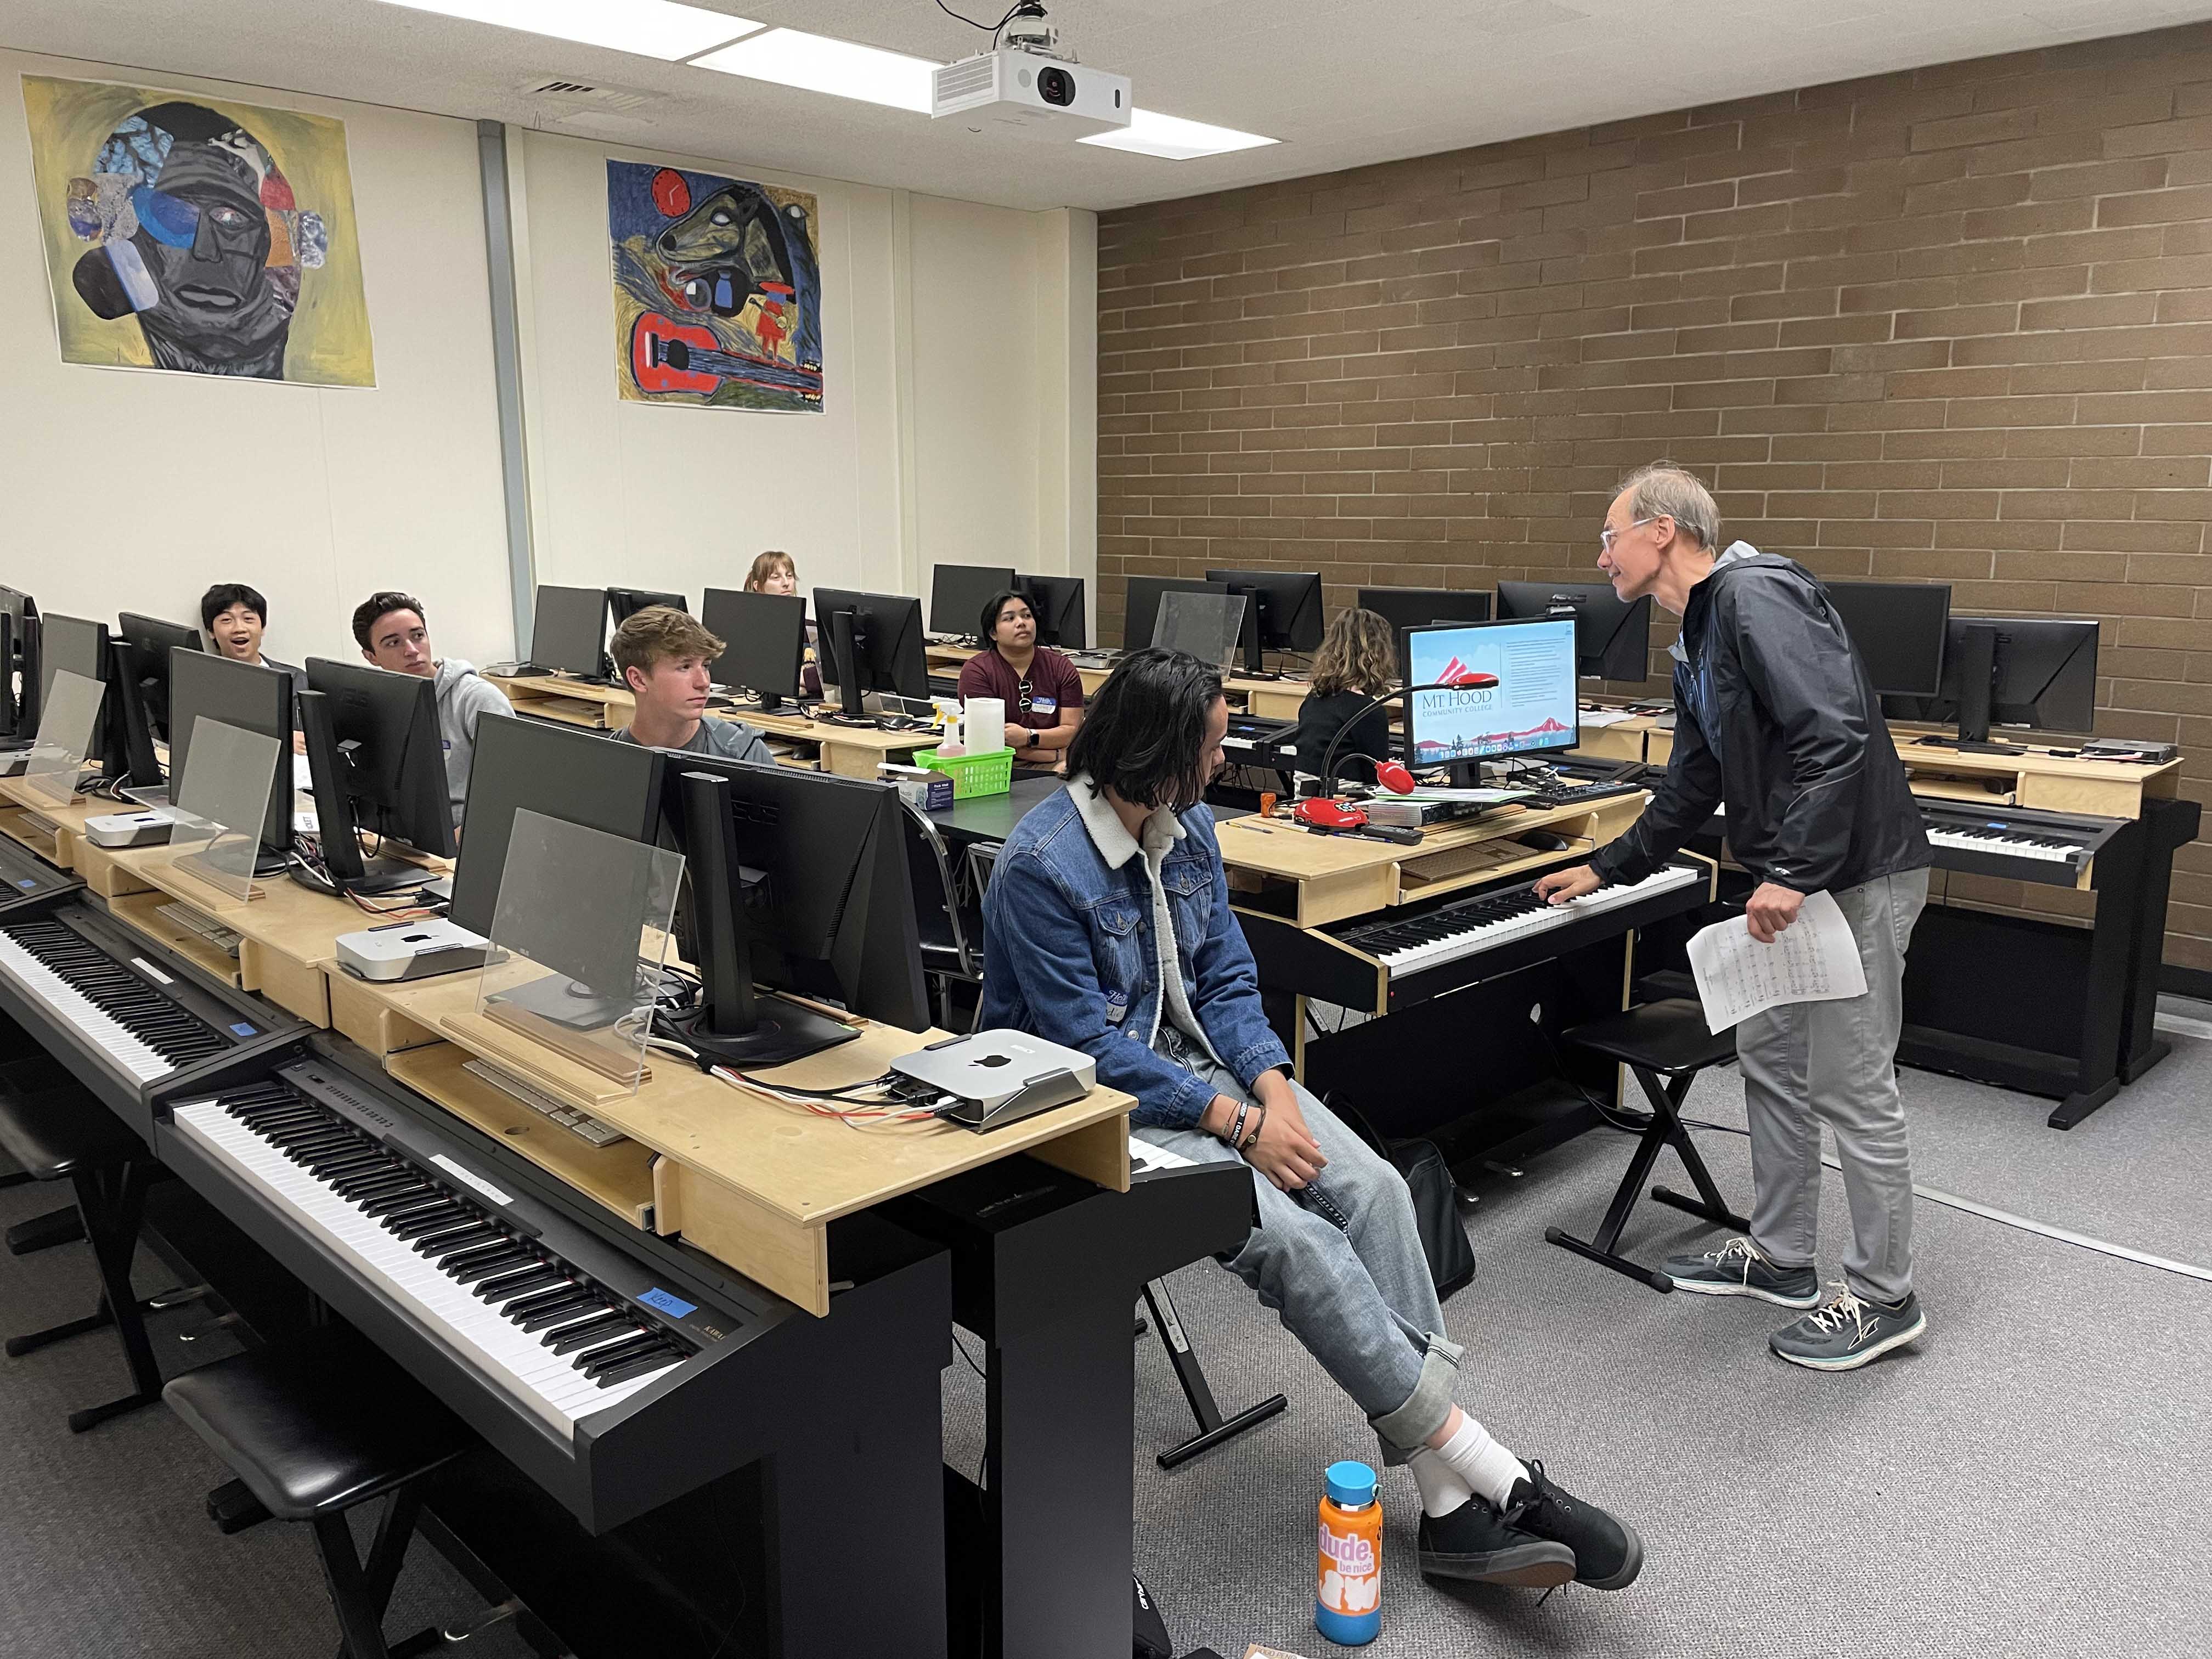 Instructor in the piano room with students